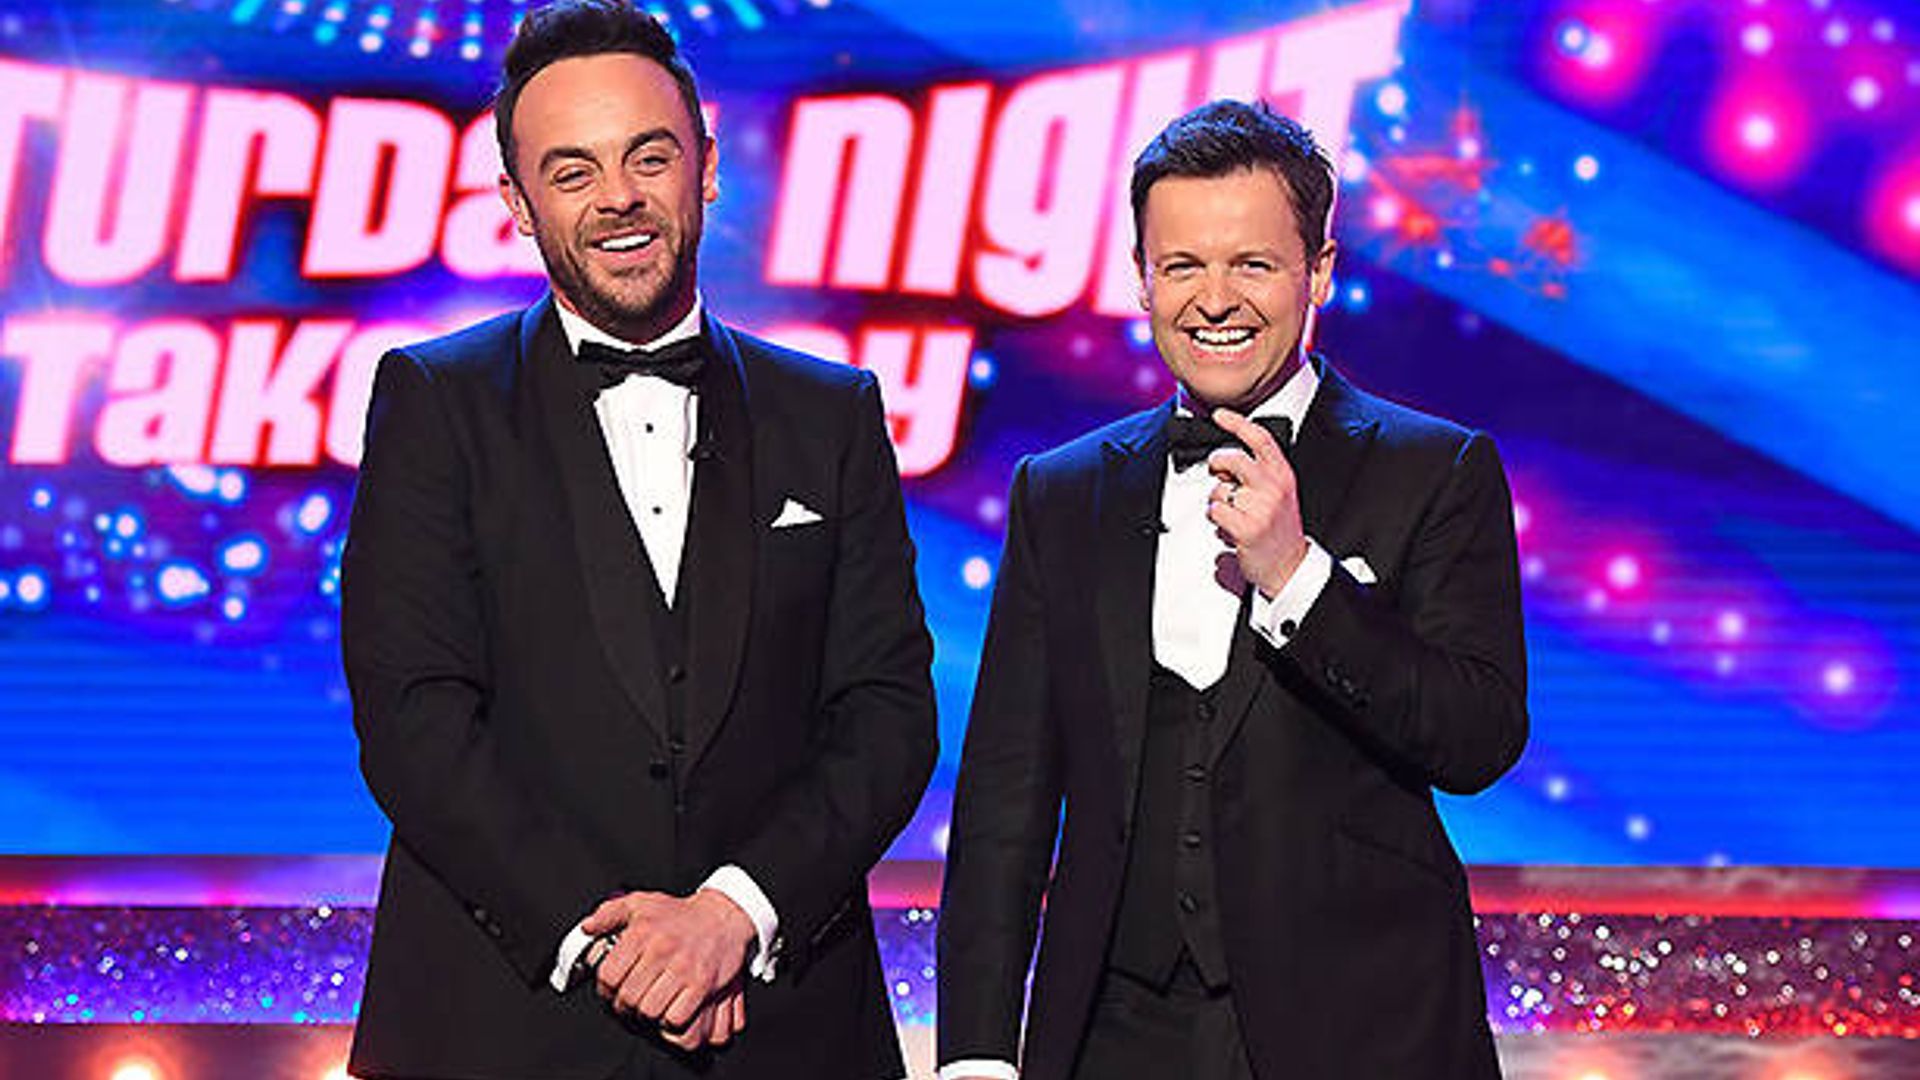 These Hollywood stars are likely to stand in for Ant McPartlin on Saturday Night Takeaway